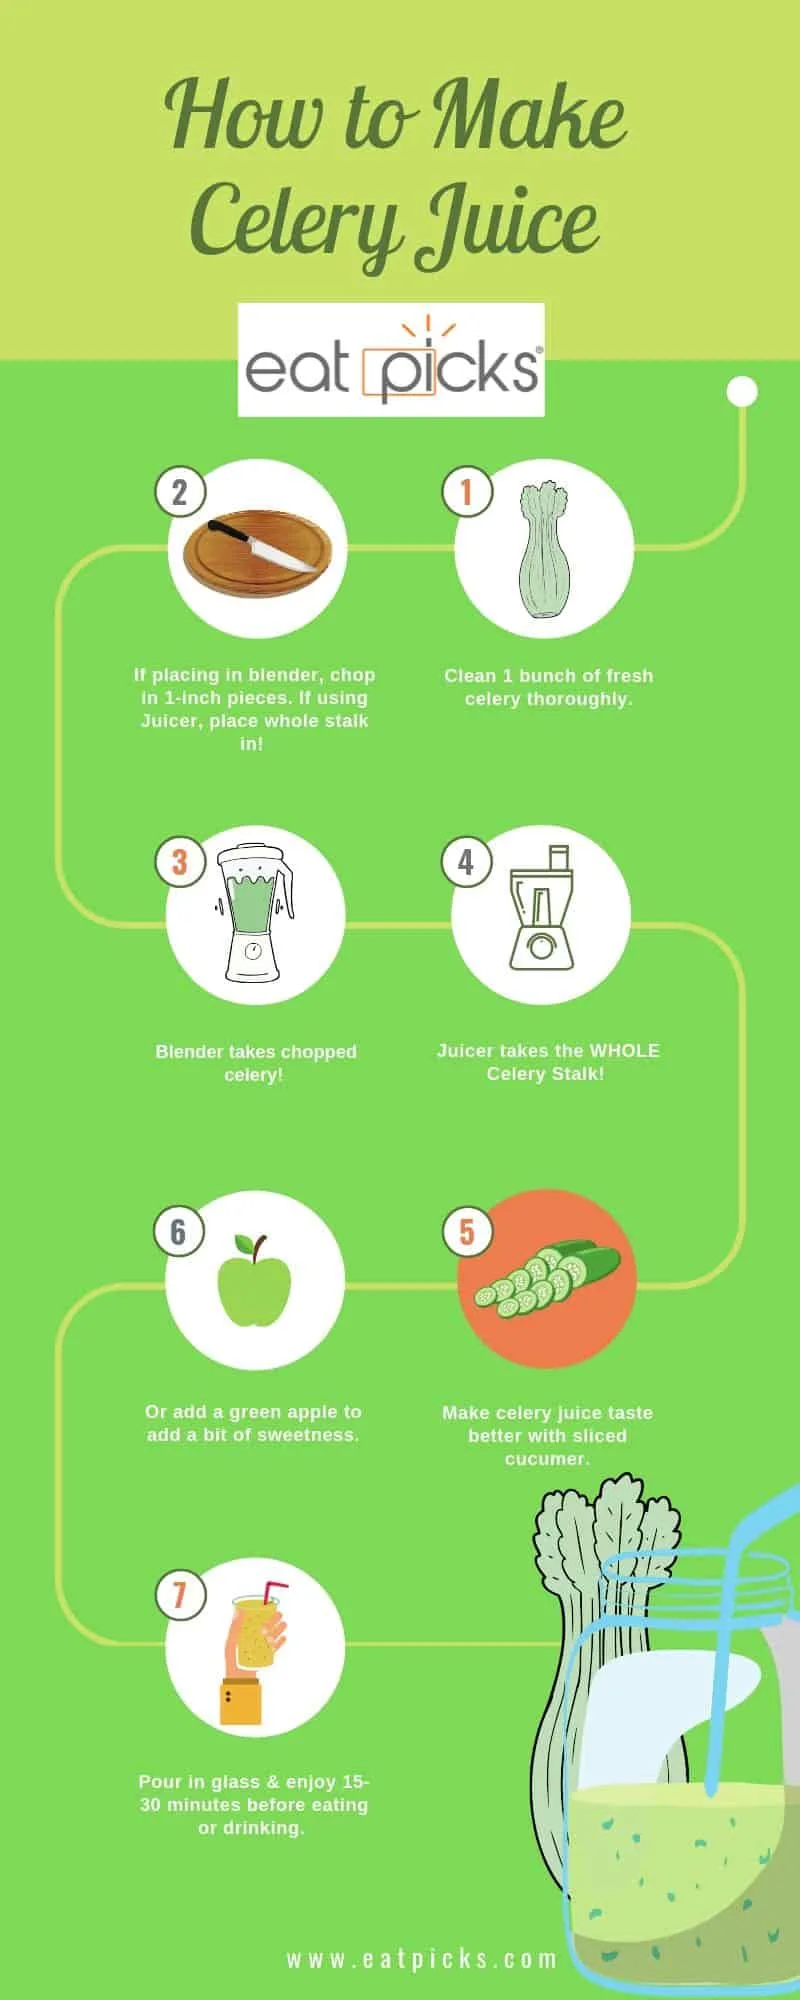 How to Make Celery Juice Infographic